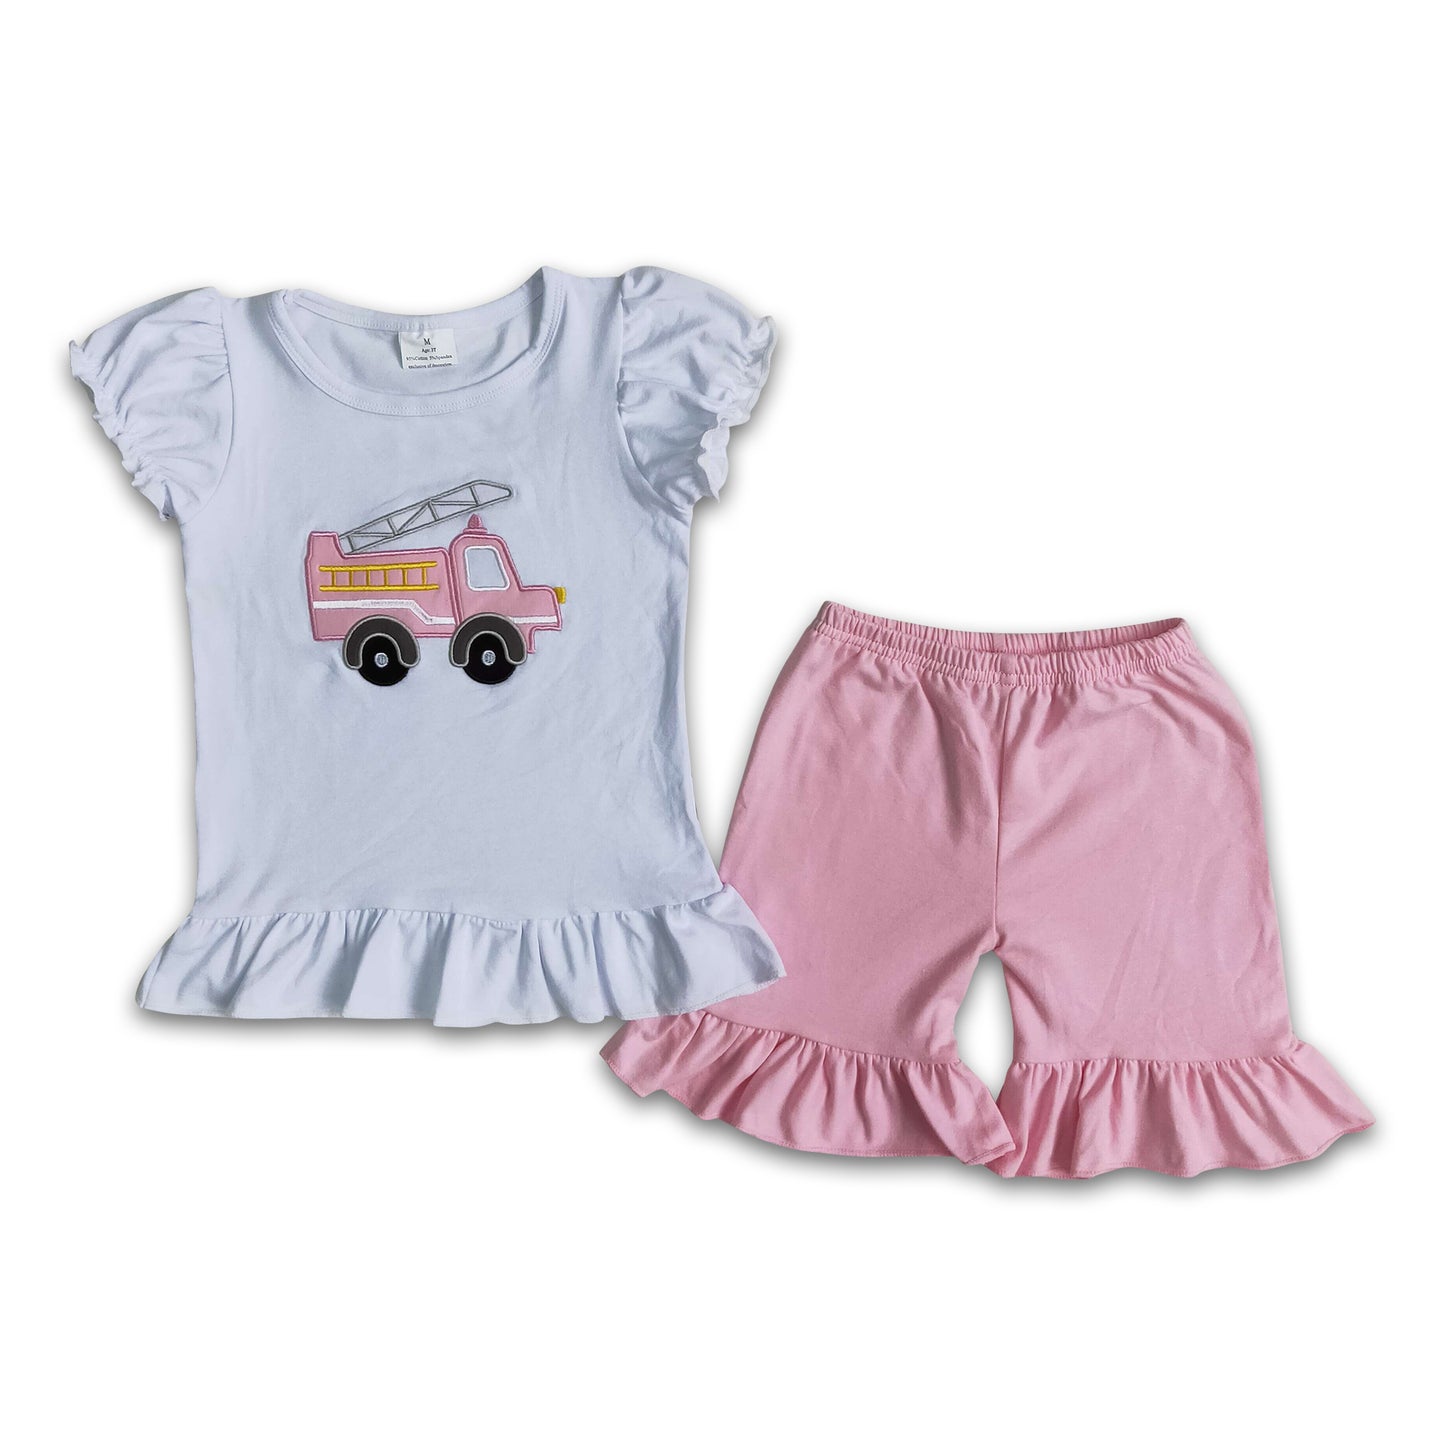 Fire truck embroidery girls outfits